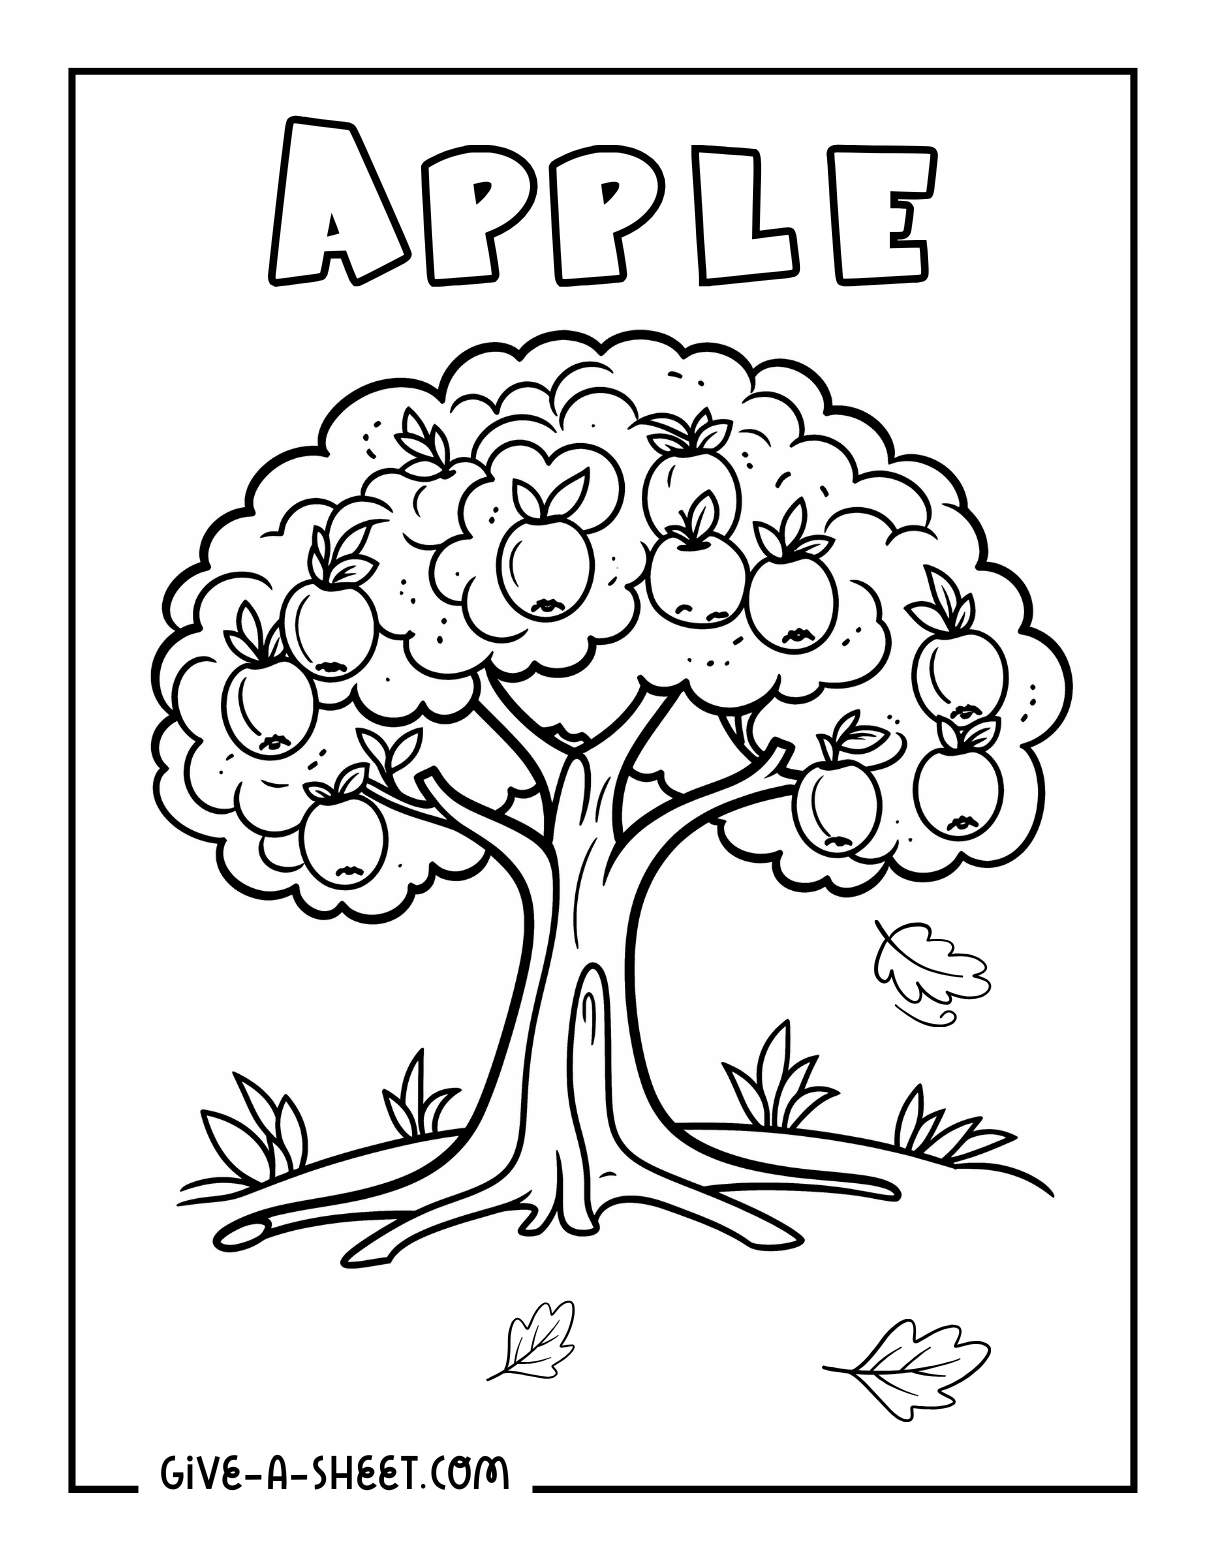 Apple tree leaves falling coloring page.